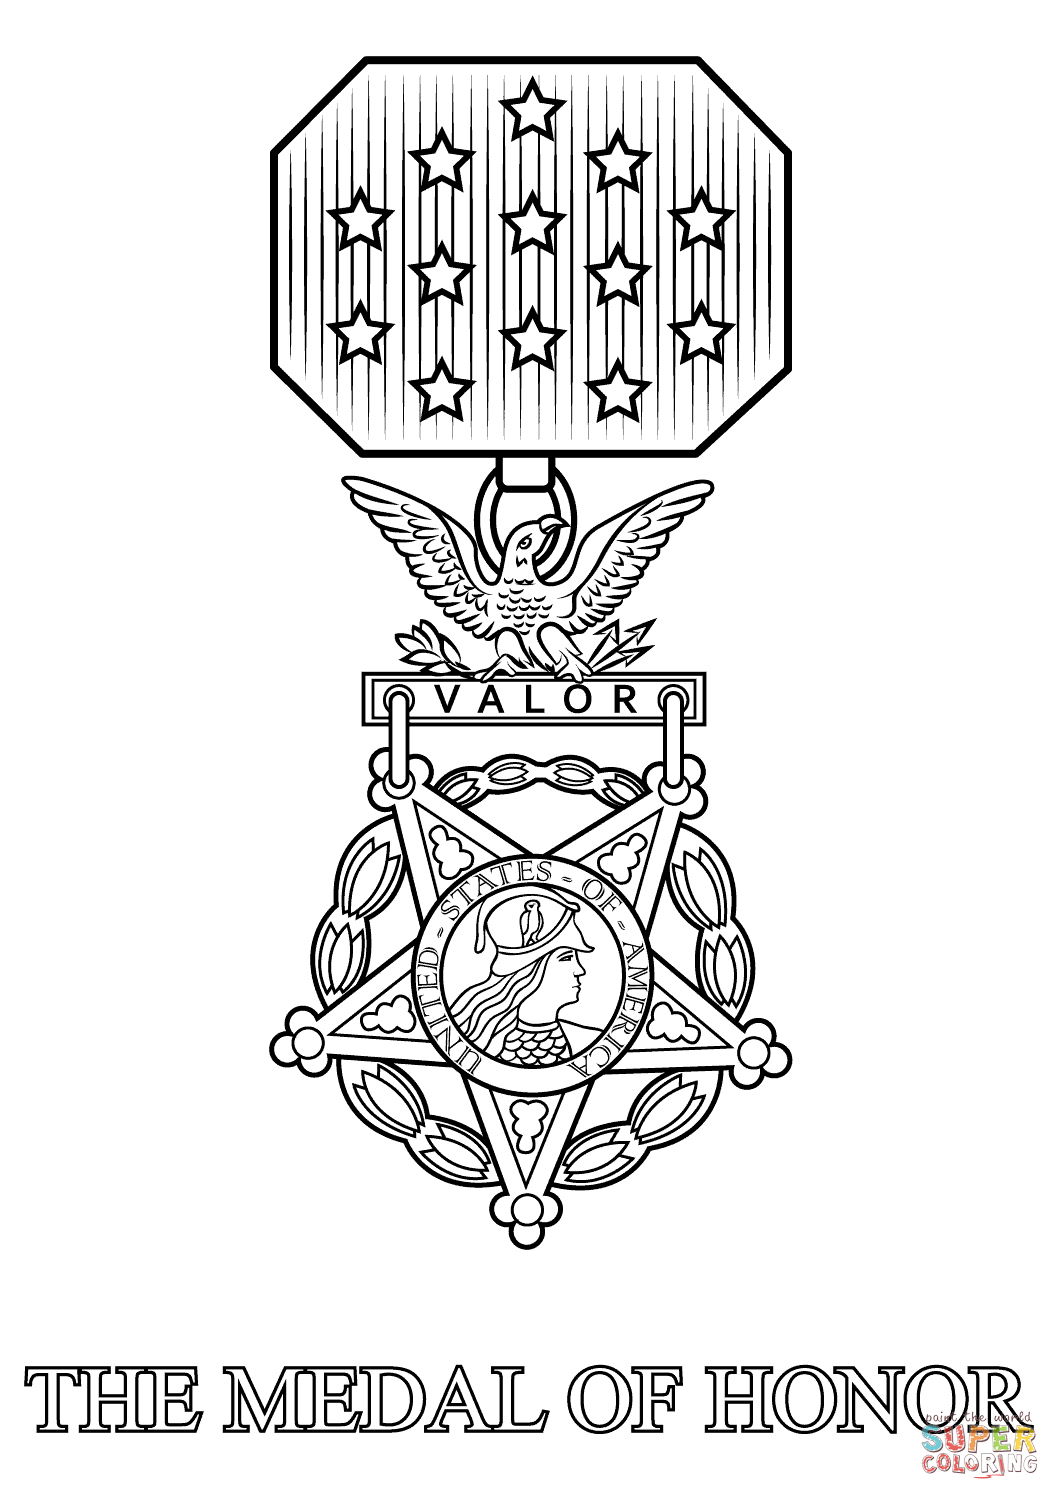 Medal of honor coloring page free printable coloring pages